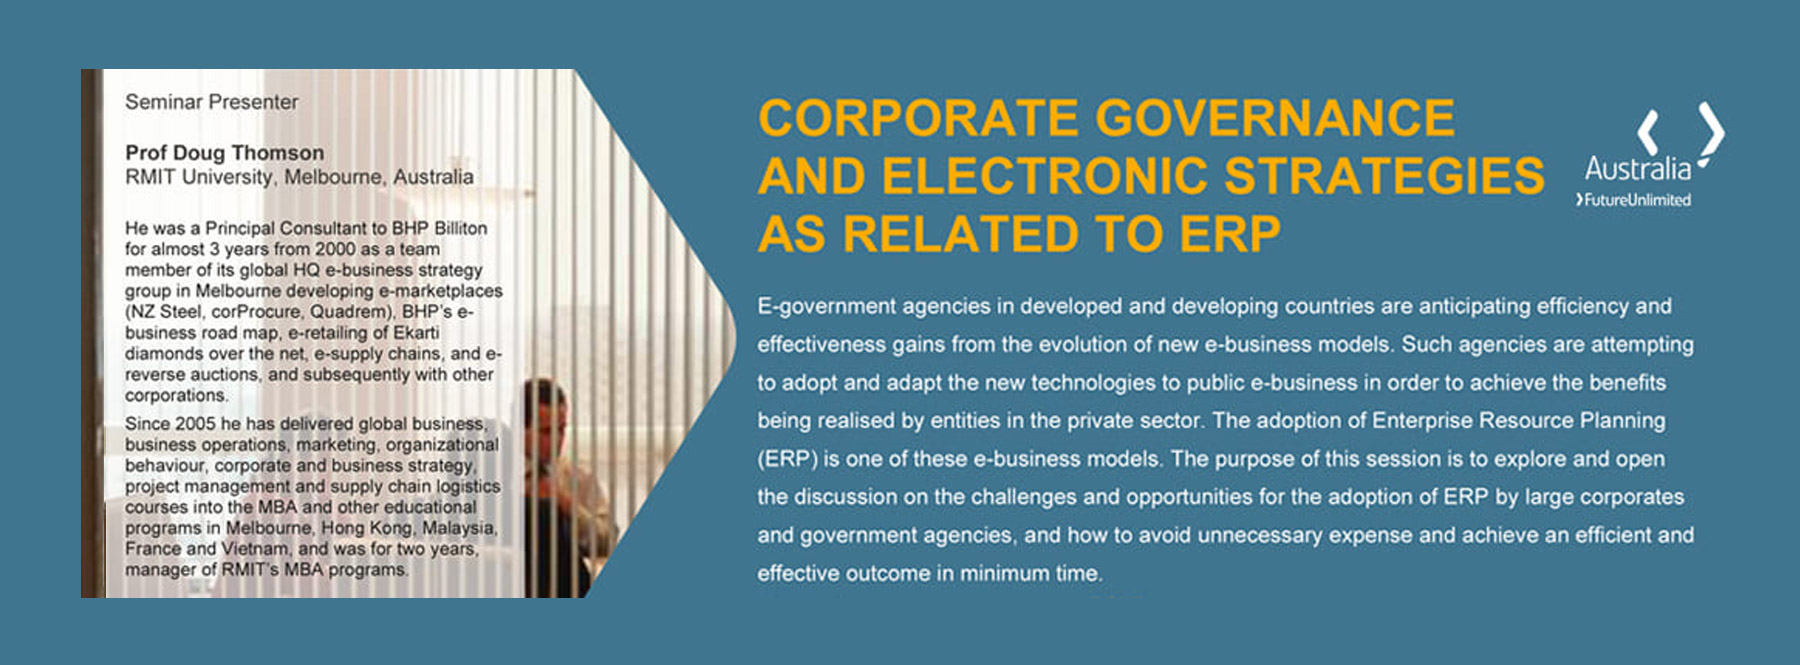 Corporate Governance and Electronic Strategies as related to ERP 2015